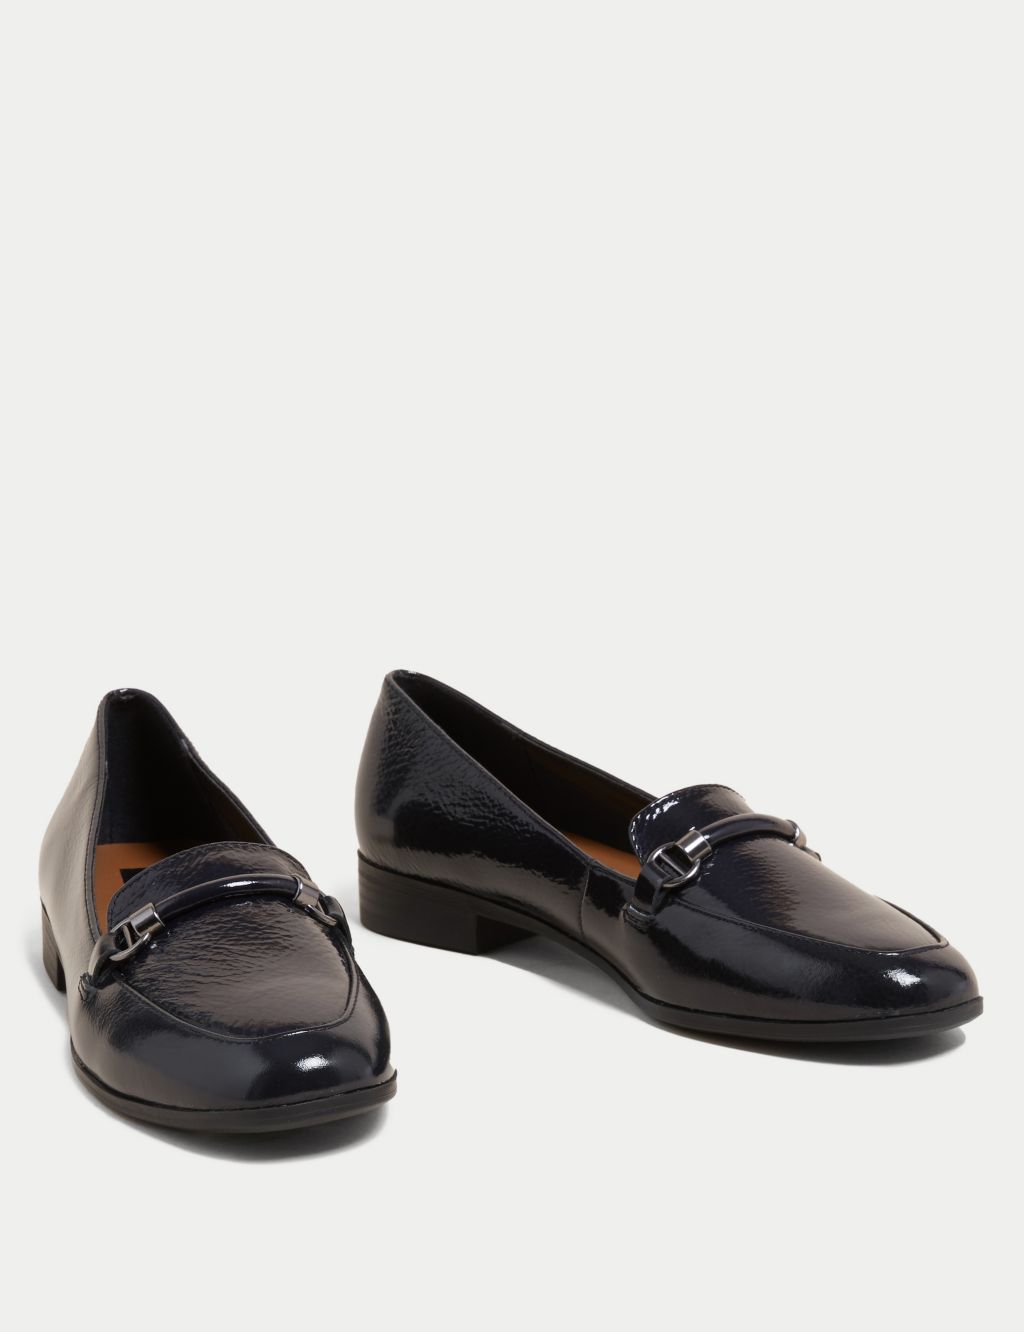 Leather Flat Loafers image 2